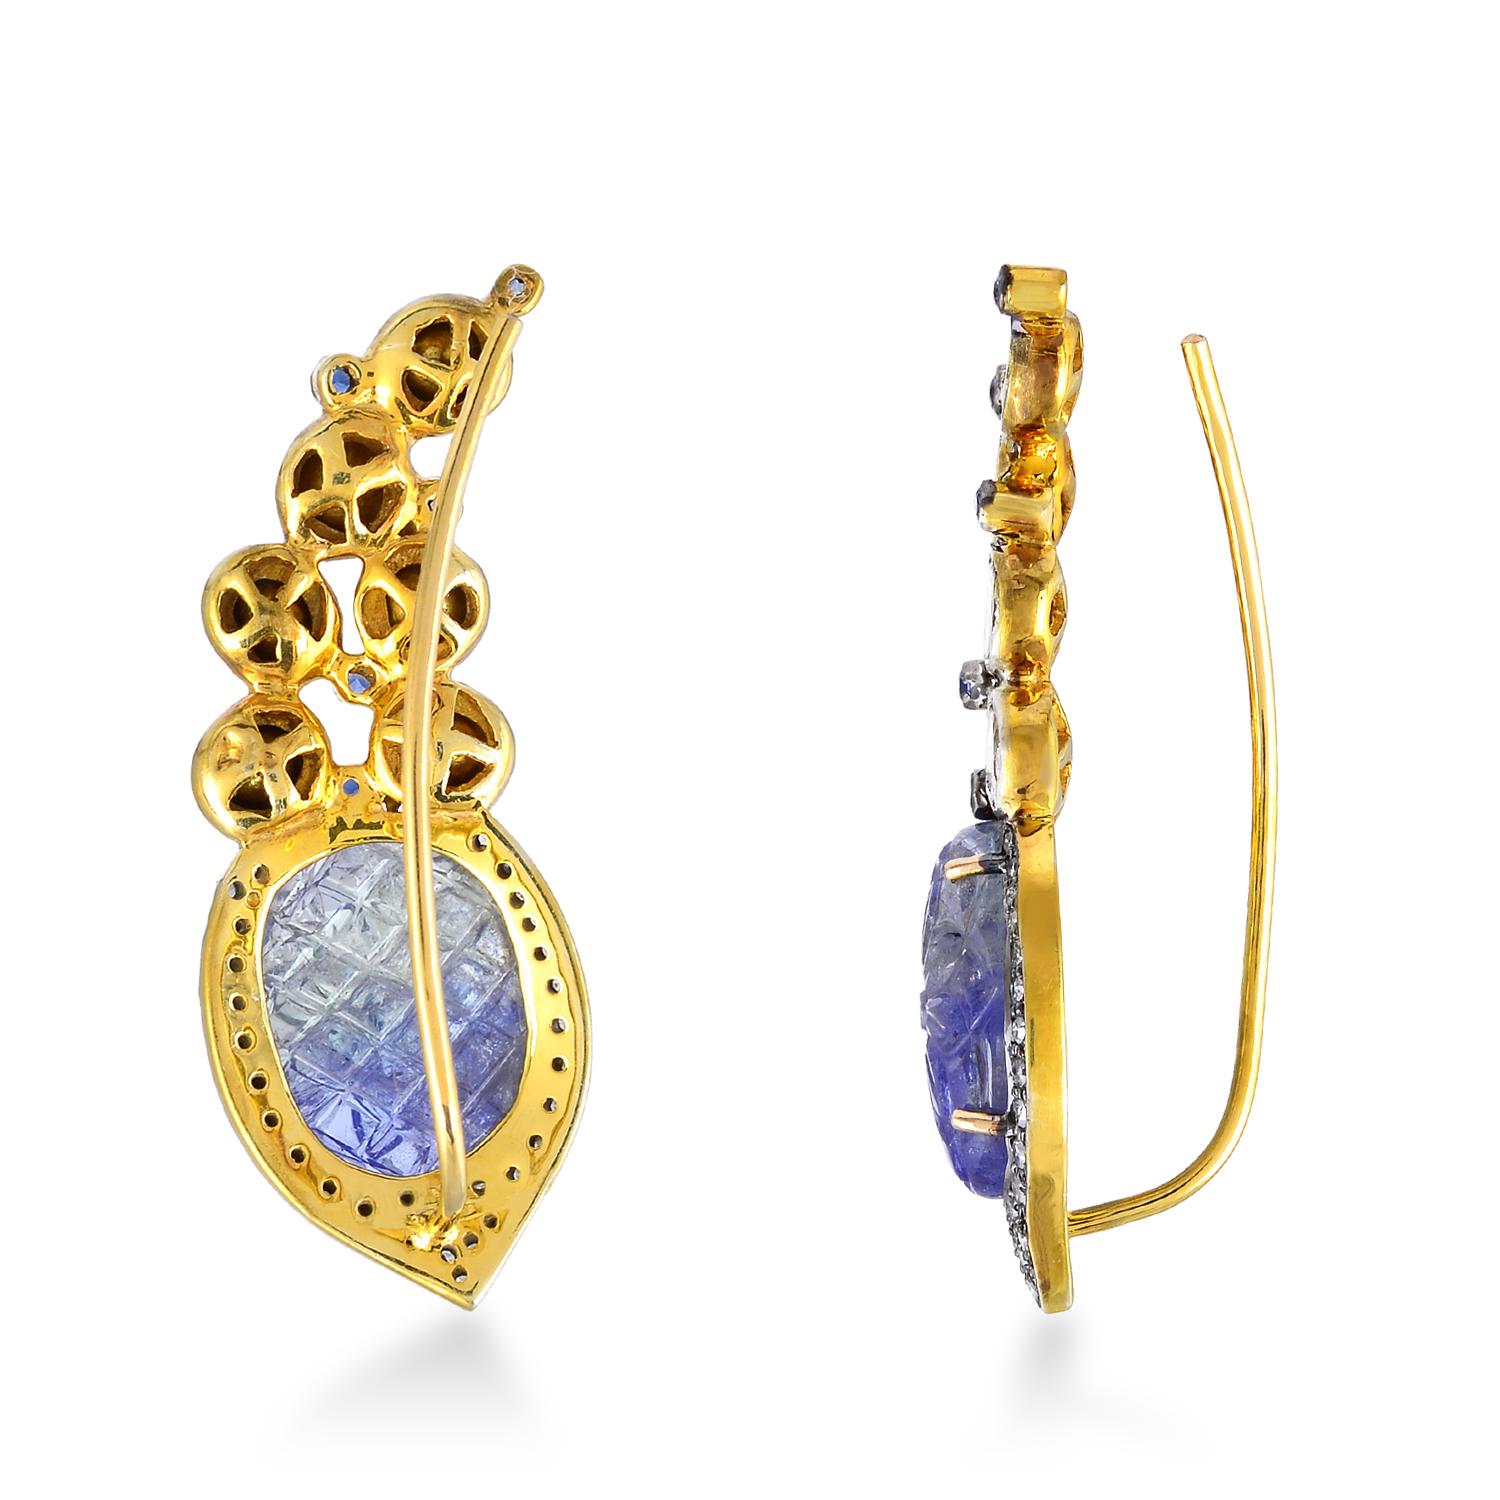 These ear climbers are handmade in 18-karat gold and sterling silver.  It is beautifully detailed with 10.6 carats tanzanite, .20 carats sapphire & 2.1 carats of sparkling diamonds. Show off their unique style by sweeping your hair back.

FOLLOW 